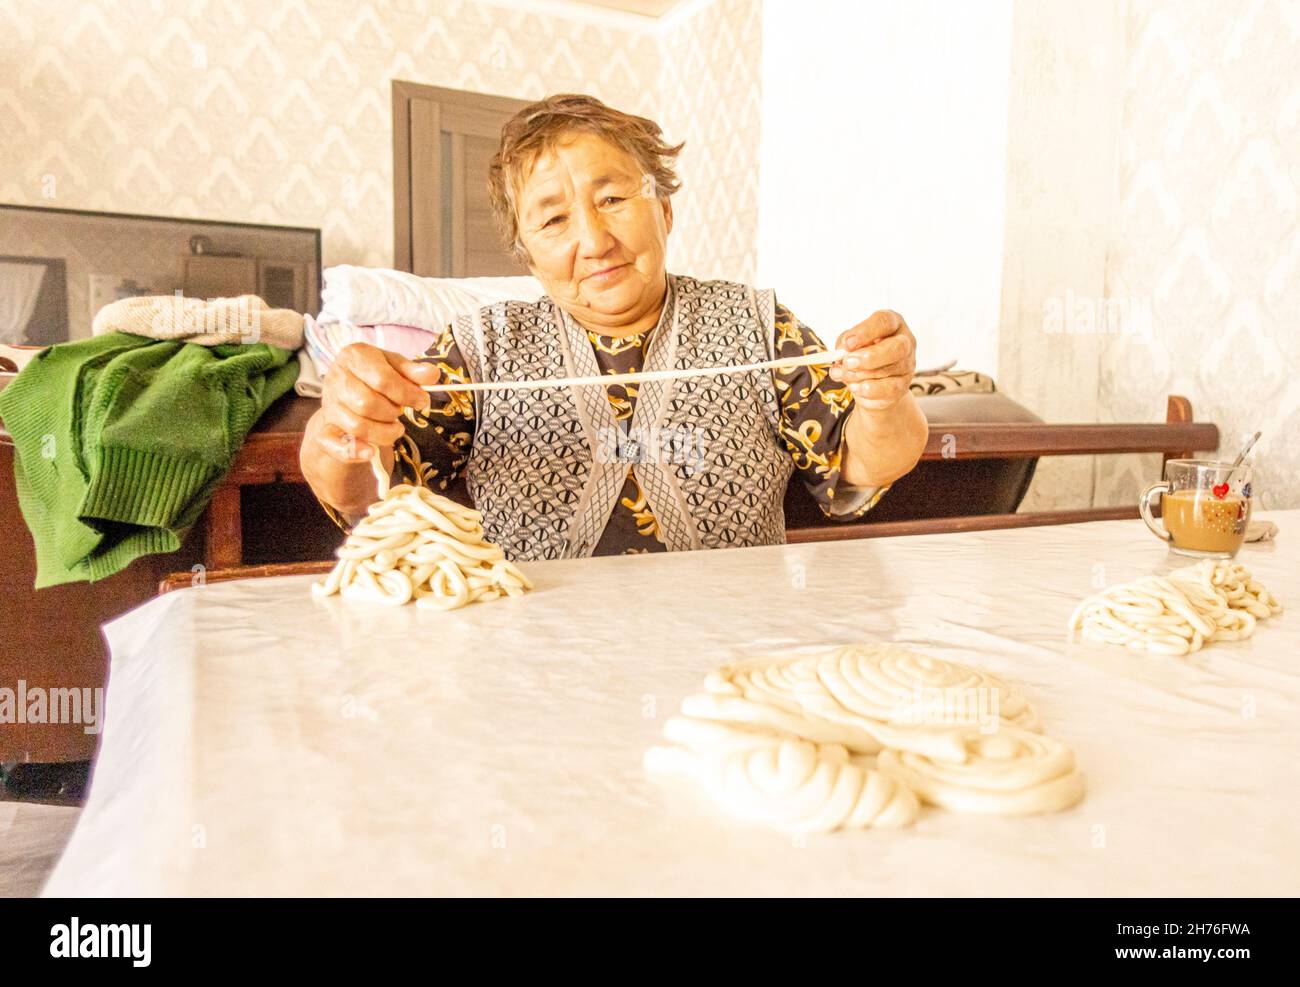 An elderly kazakh woman preparing pooled long noodles for cooking laghman dish- a traditional Central Asian meal Stock Photo